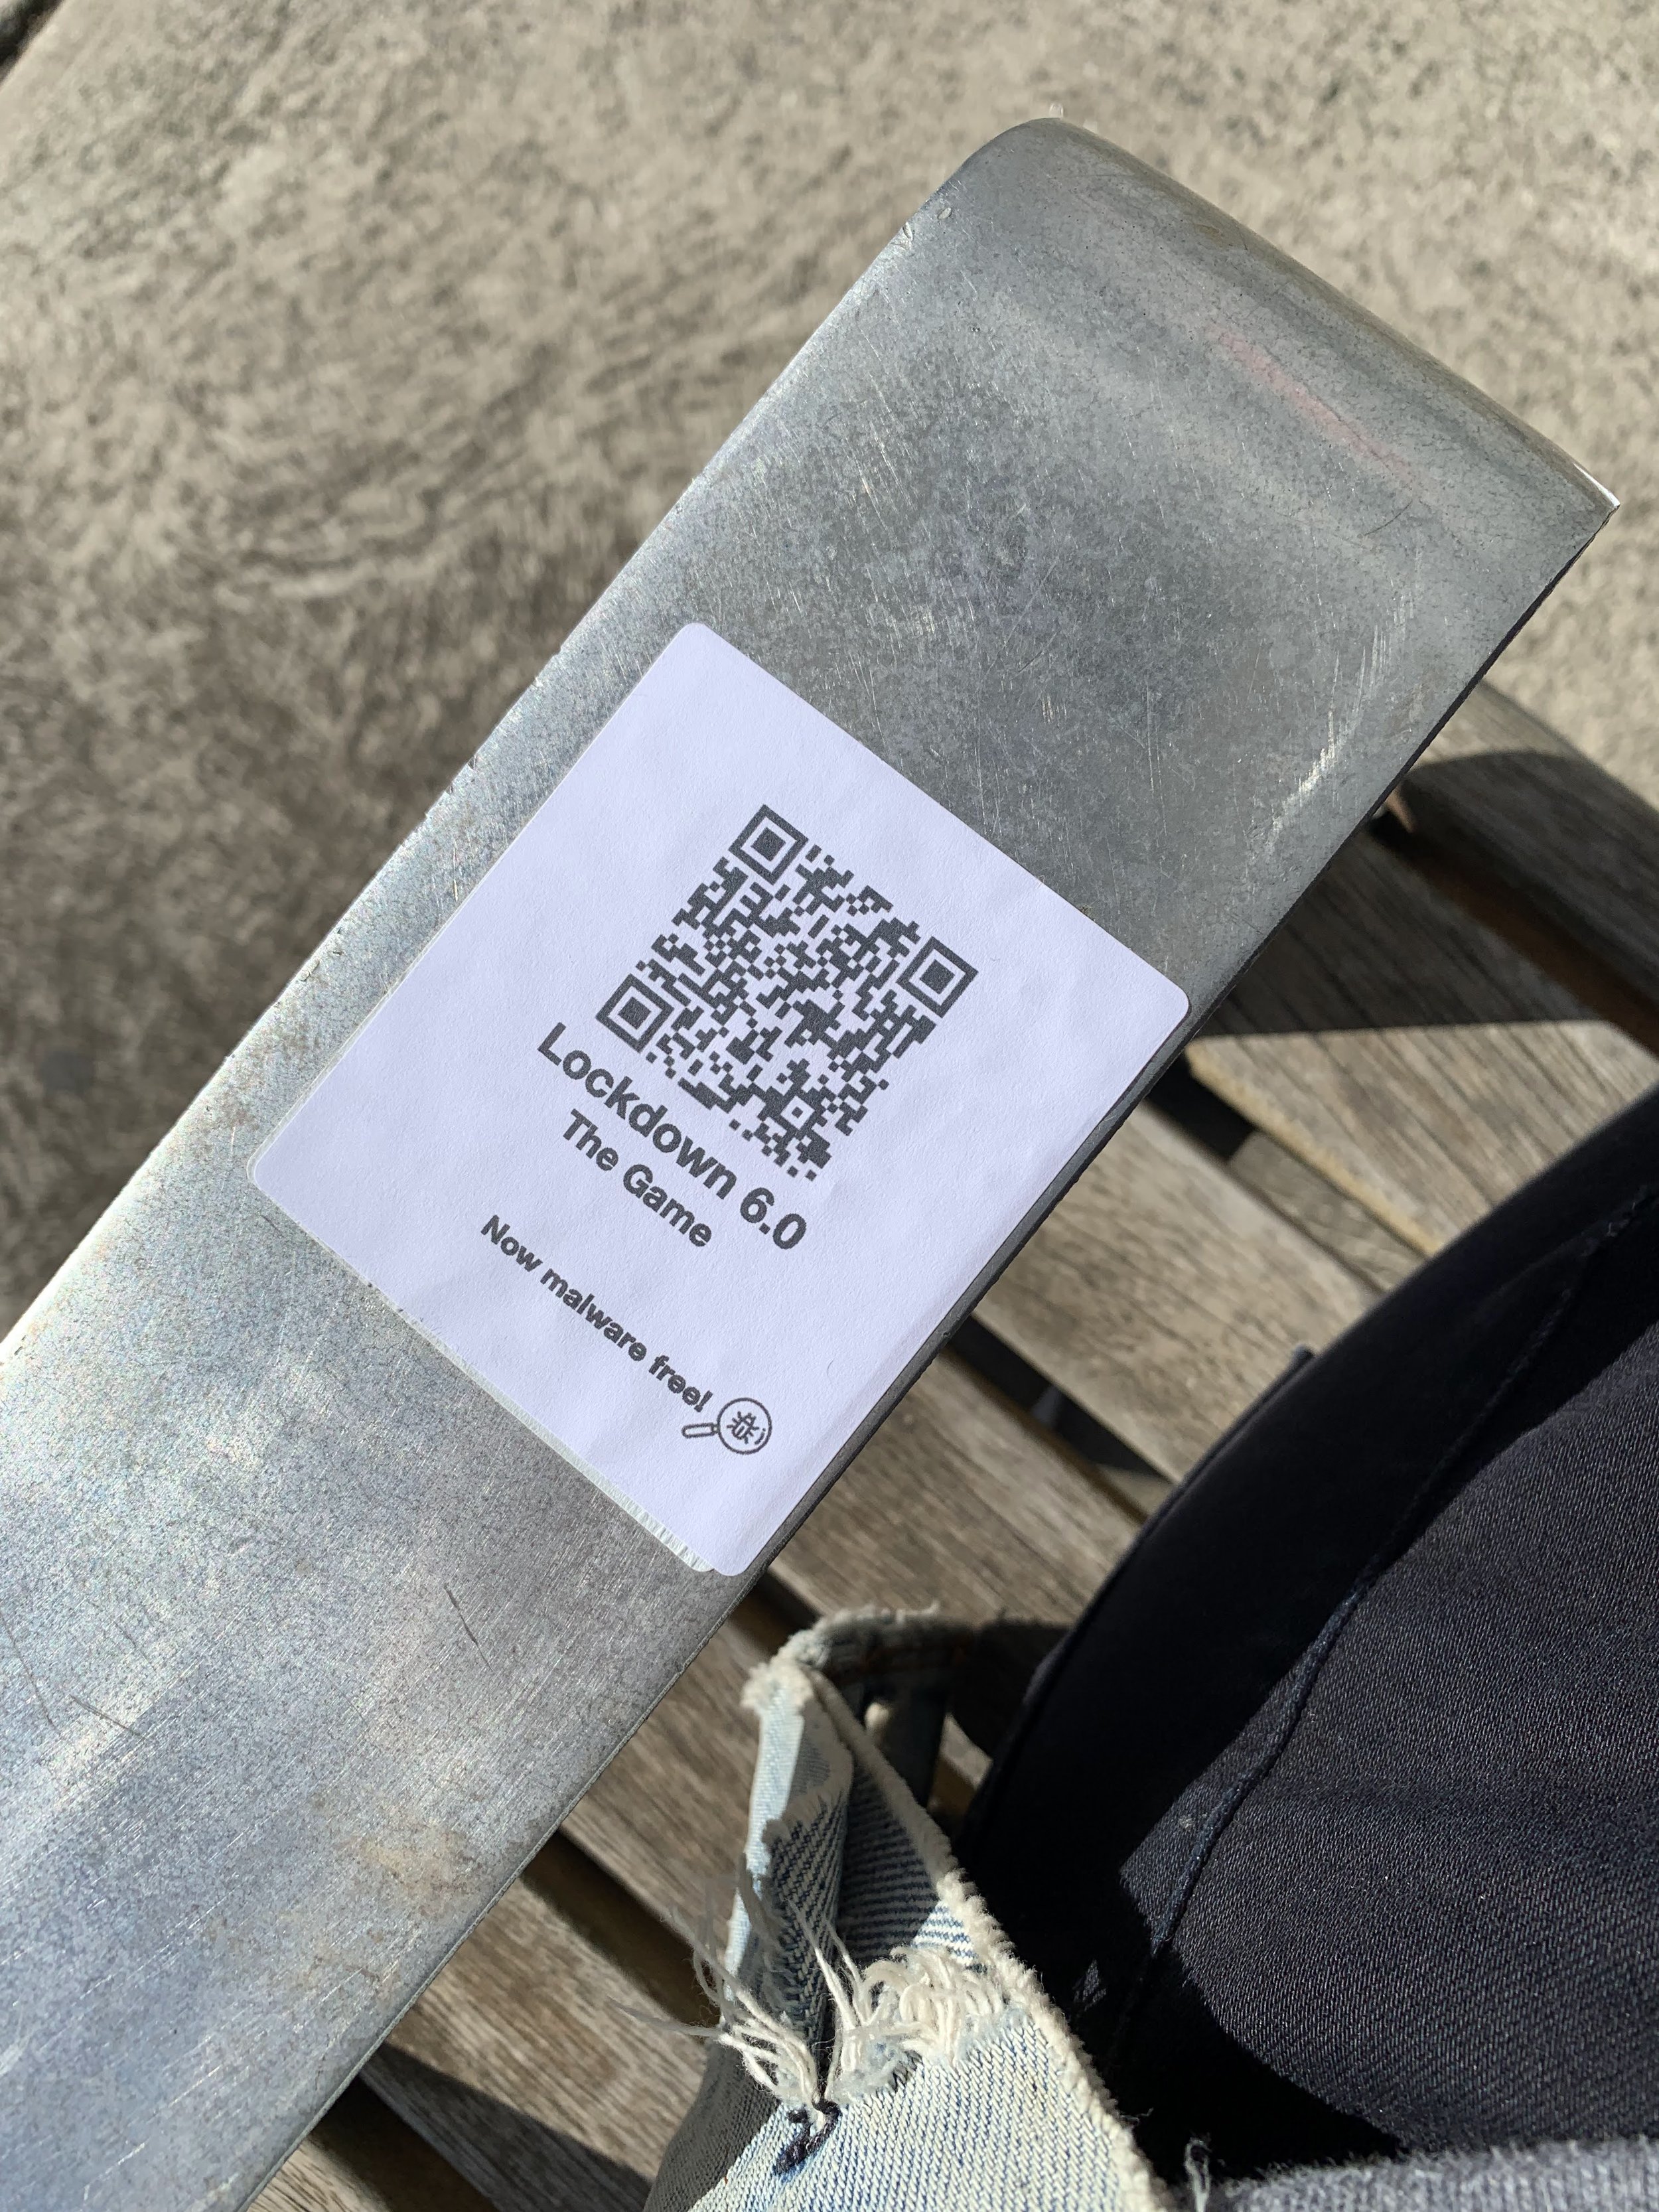  Alt text: A QR code on the arm of a park bench reads: Lockdown 6.0. The Game. Now malware free. 